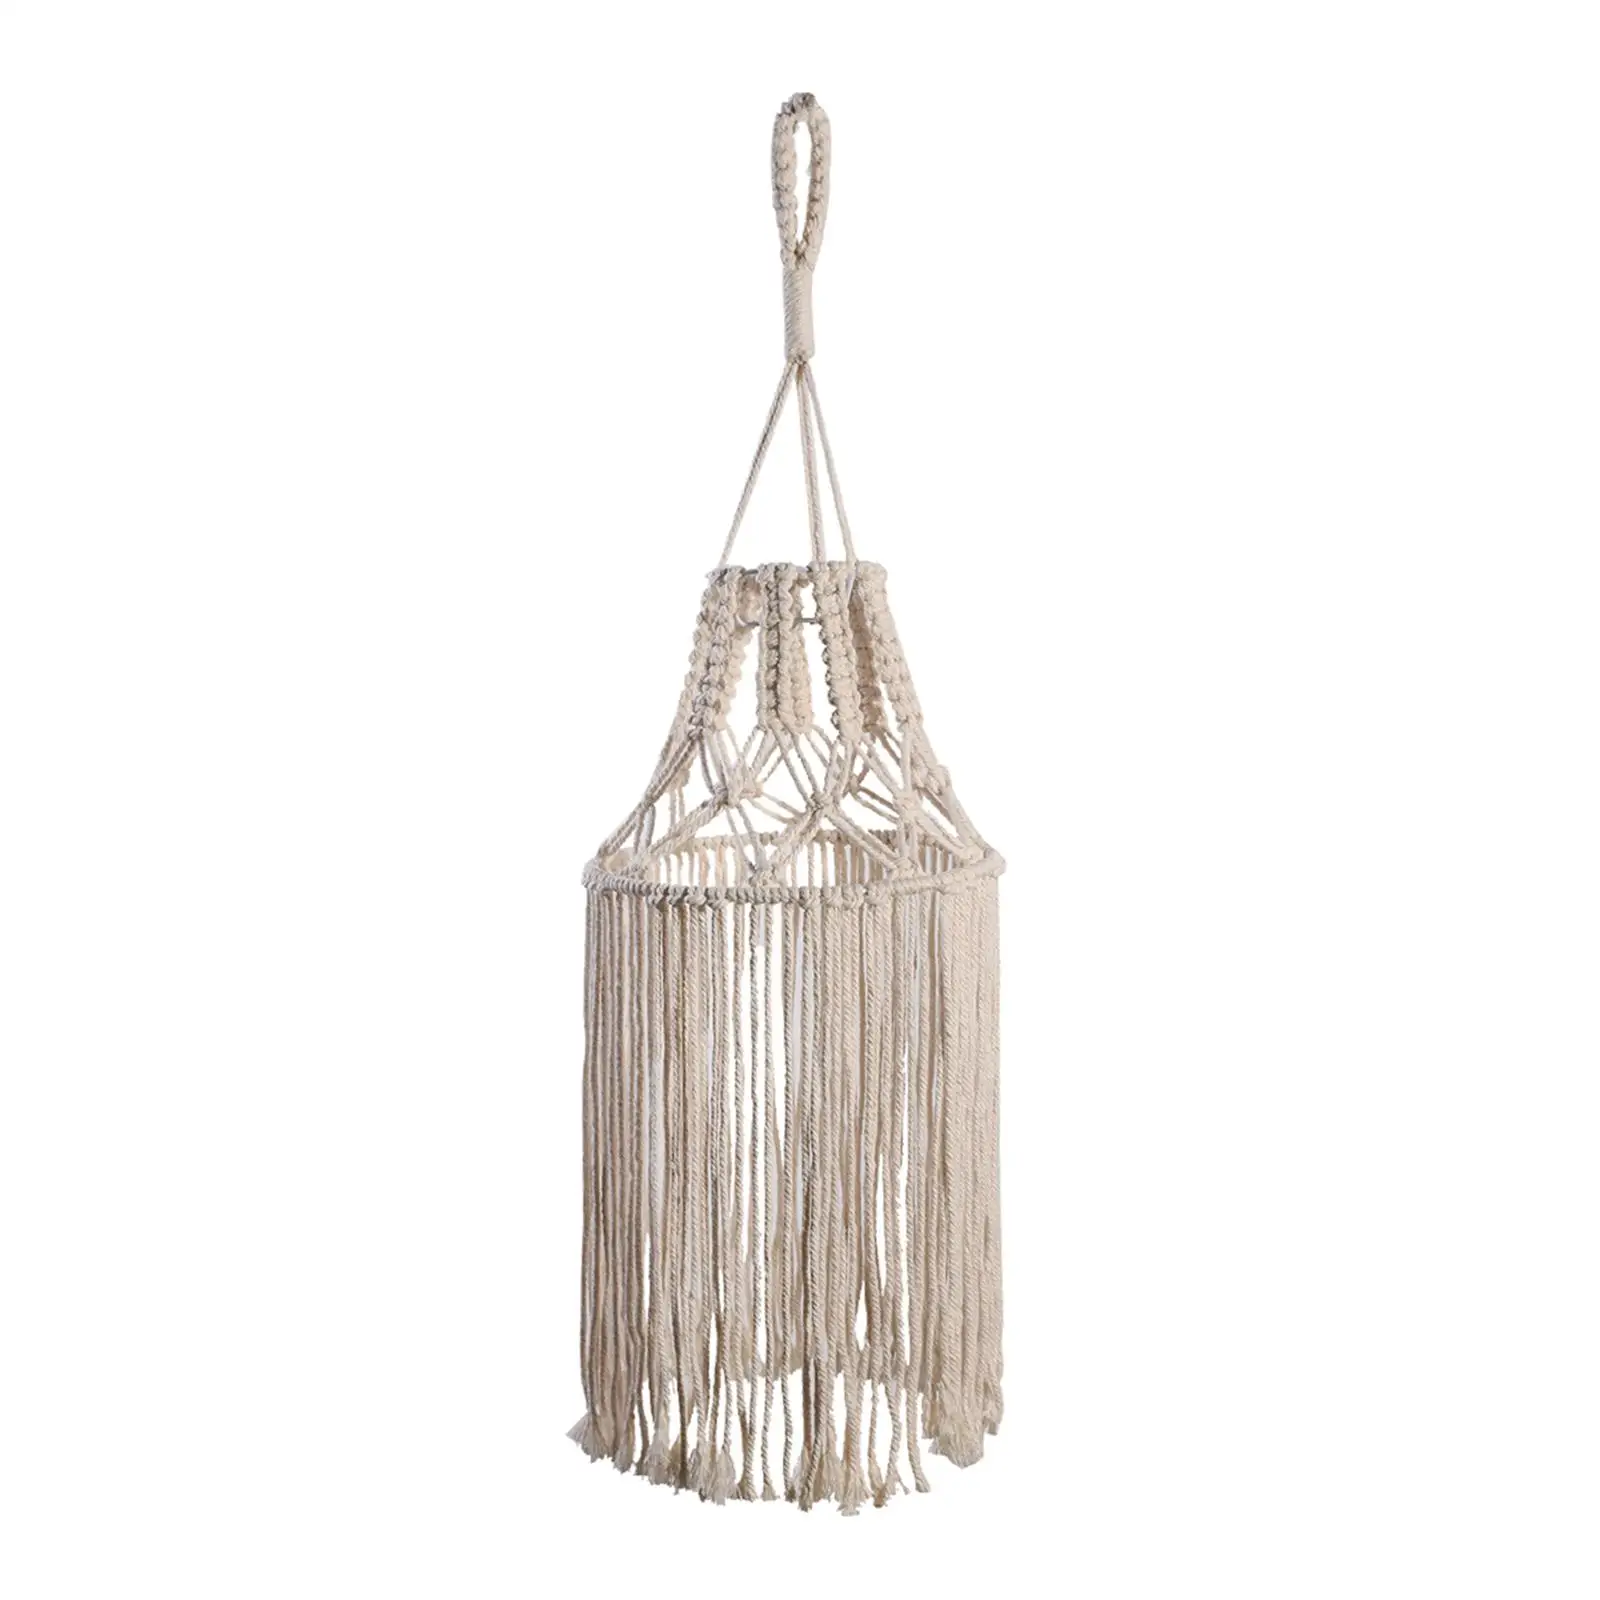 Bohemian Macrame Ceiling Lamp Shade Hanging Light Cover Tapestry Handwoven Lampshade for Office Dorm Home Decor Bedroom